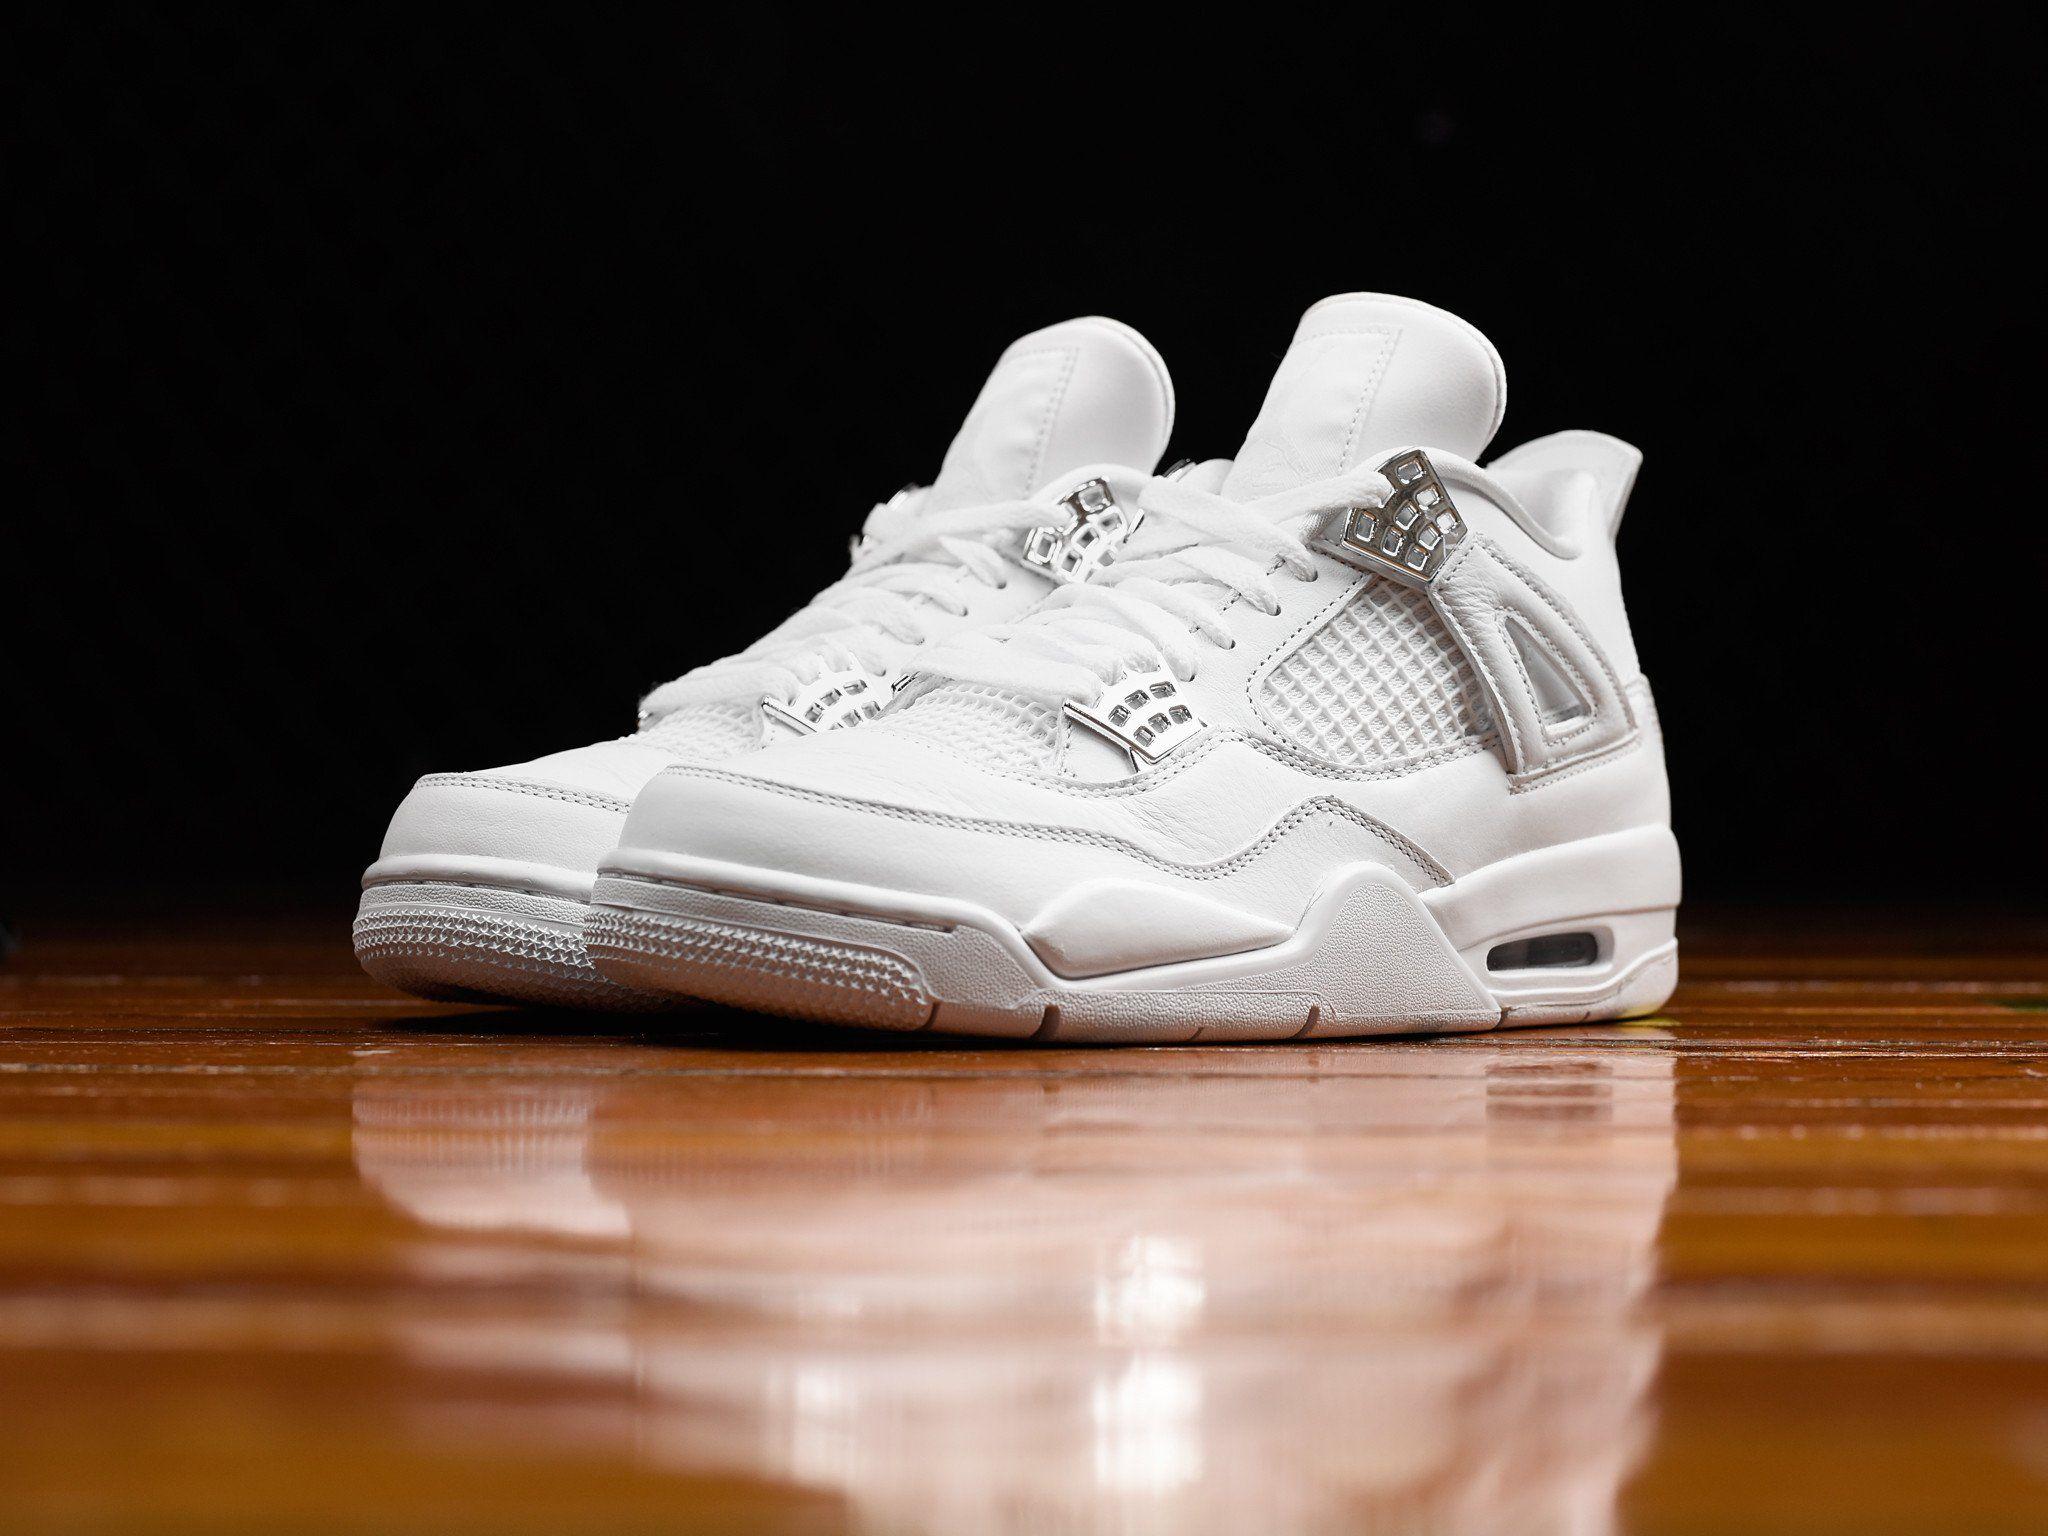 The Air Jordan 4 Pure Money Needs To Be Added To Your Summer Sneaker